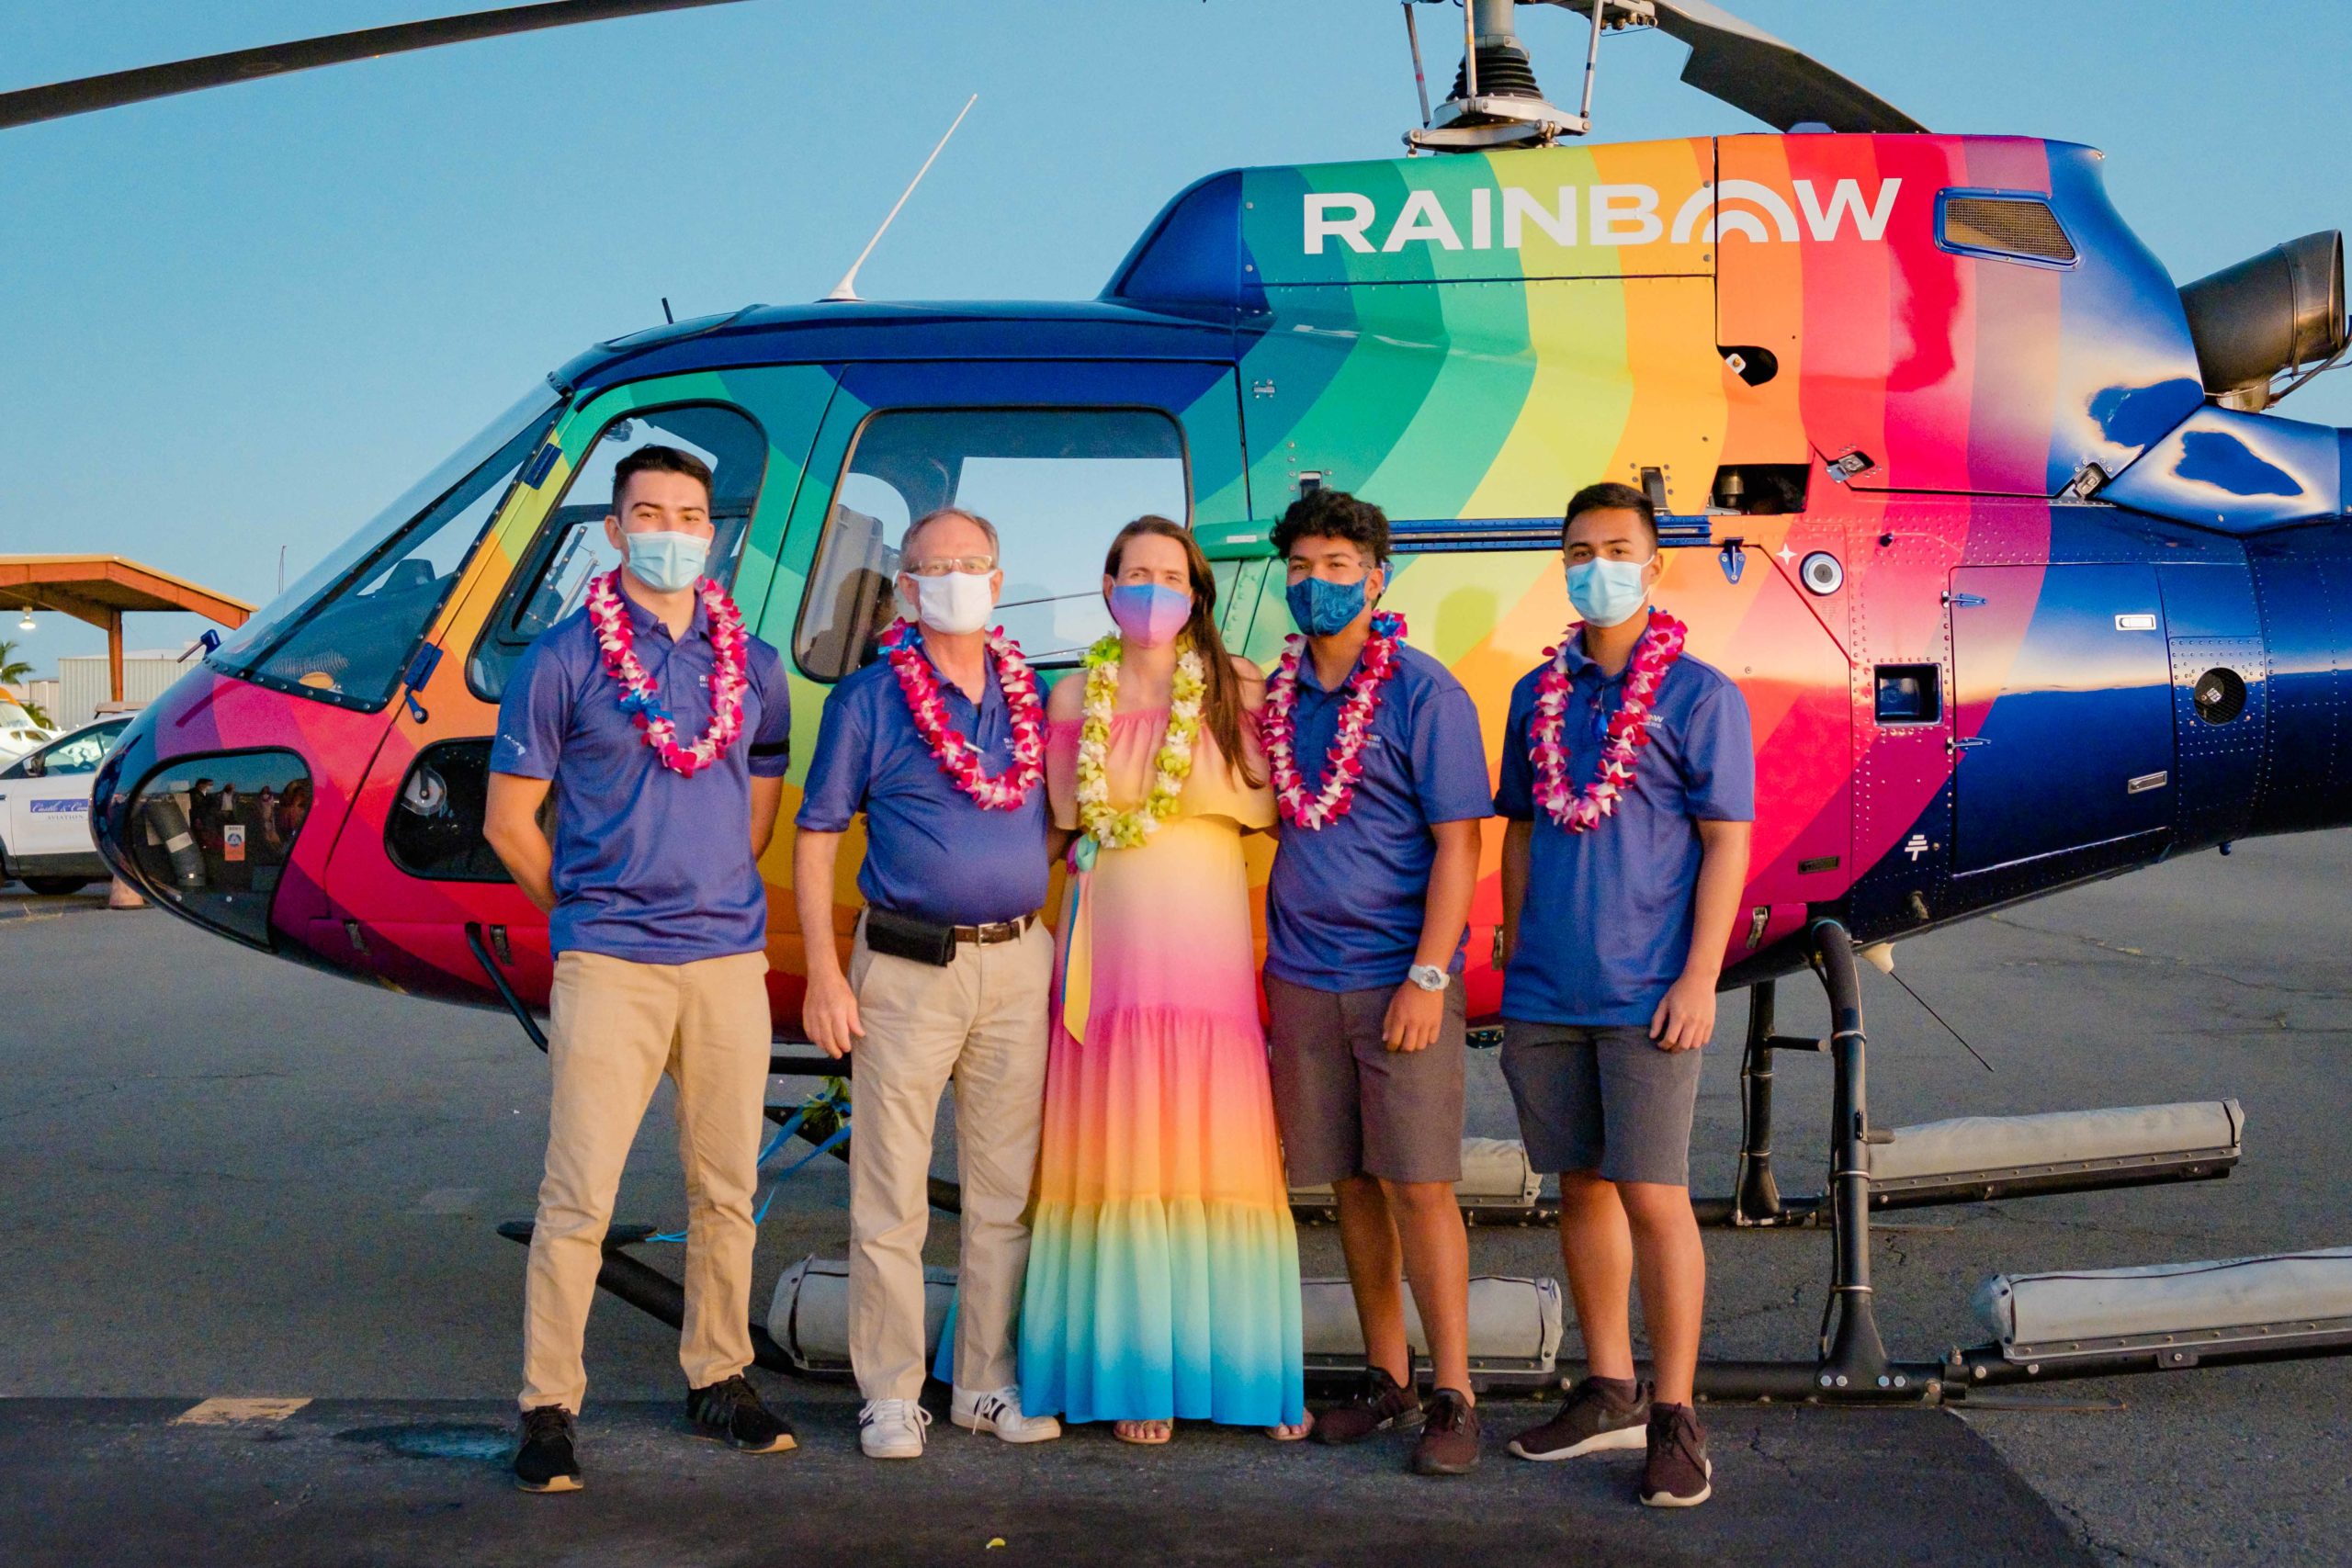 Rainbow Helicopters blessing ceremony